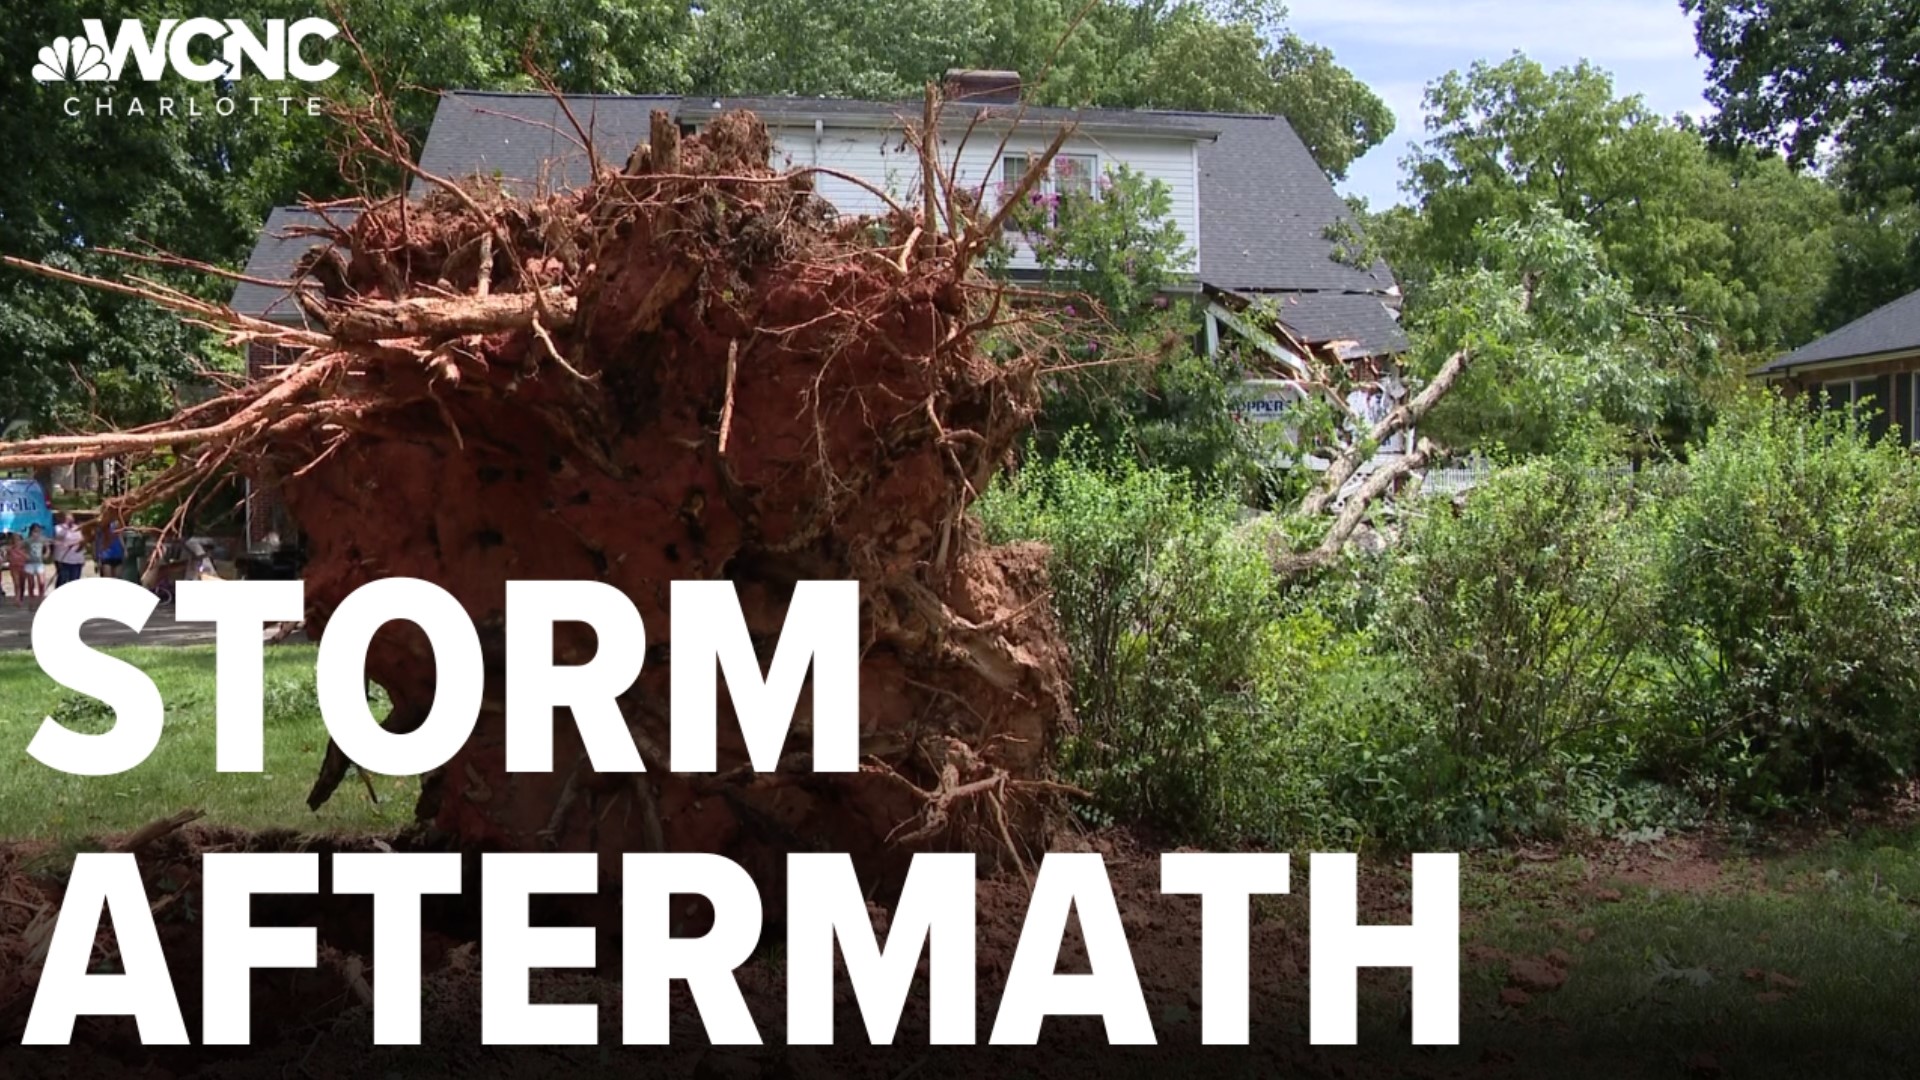 The clean-up has just begun after heavy-hitting storms slammed the entire area.